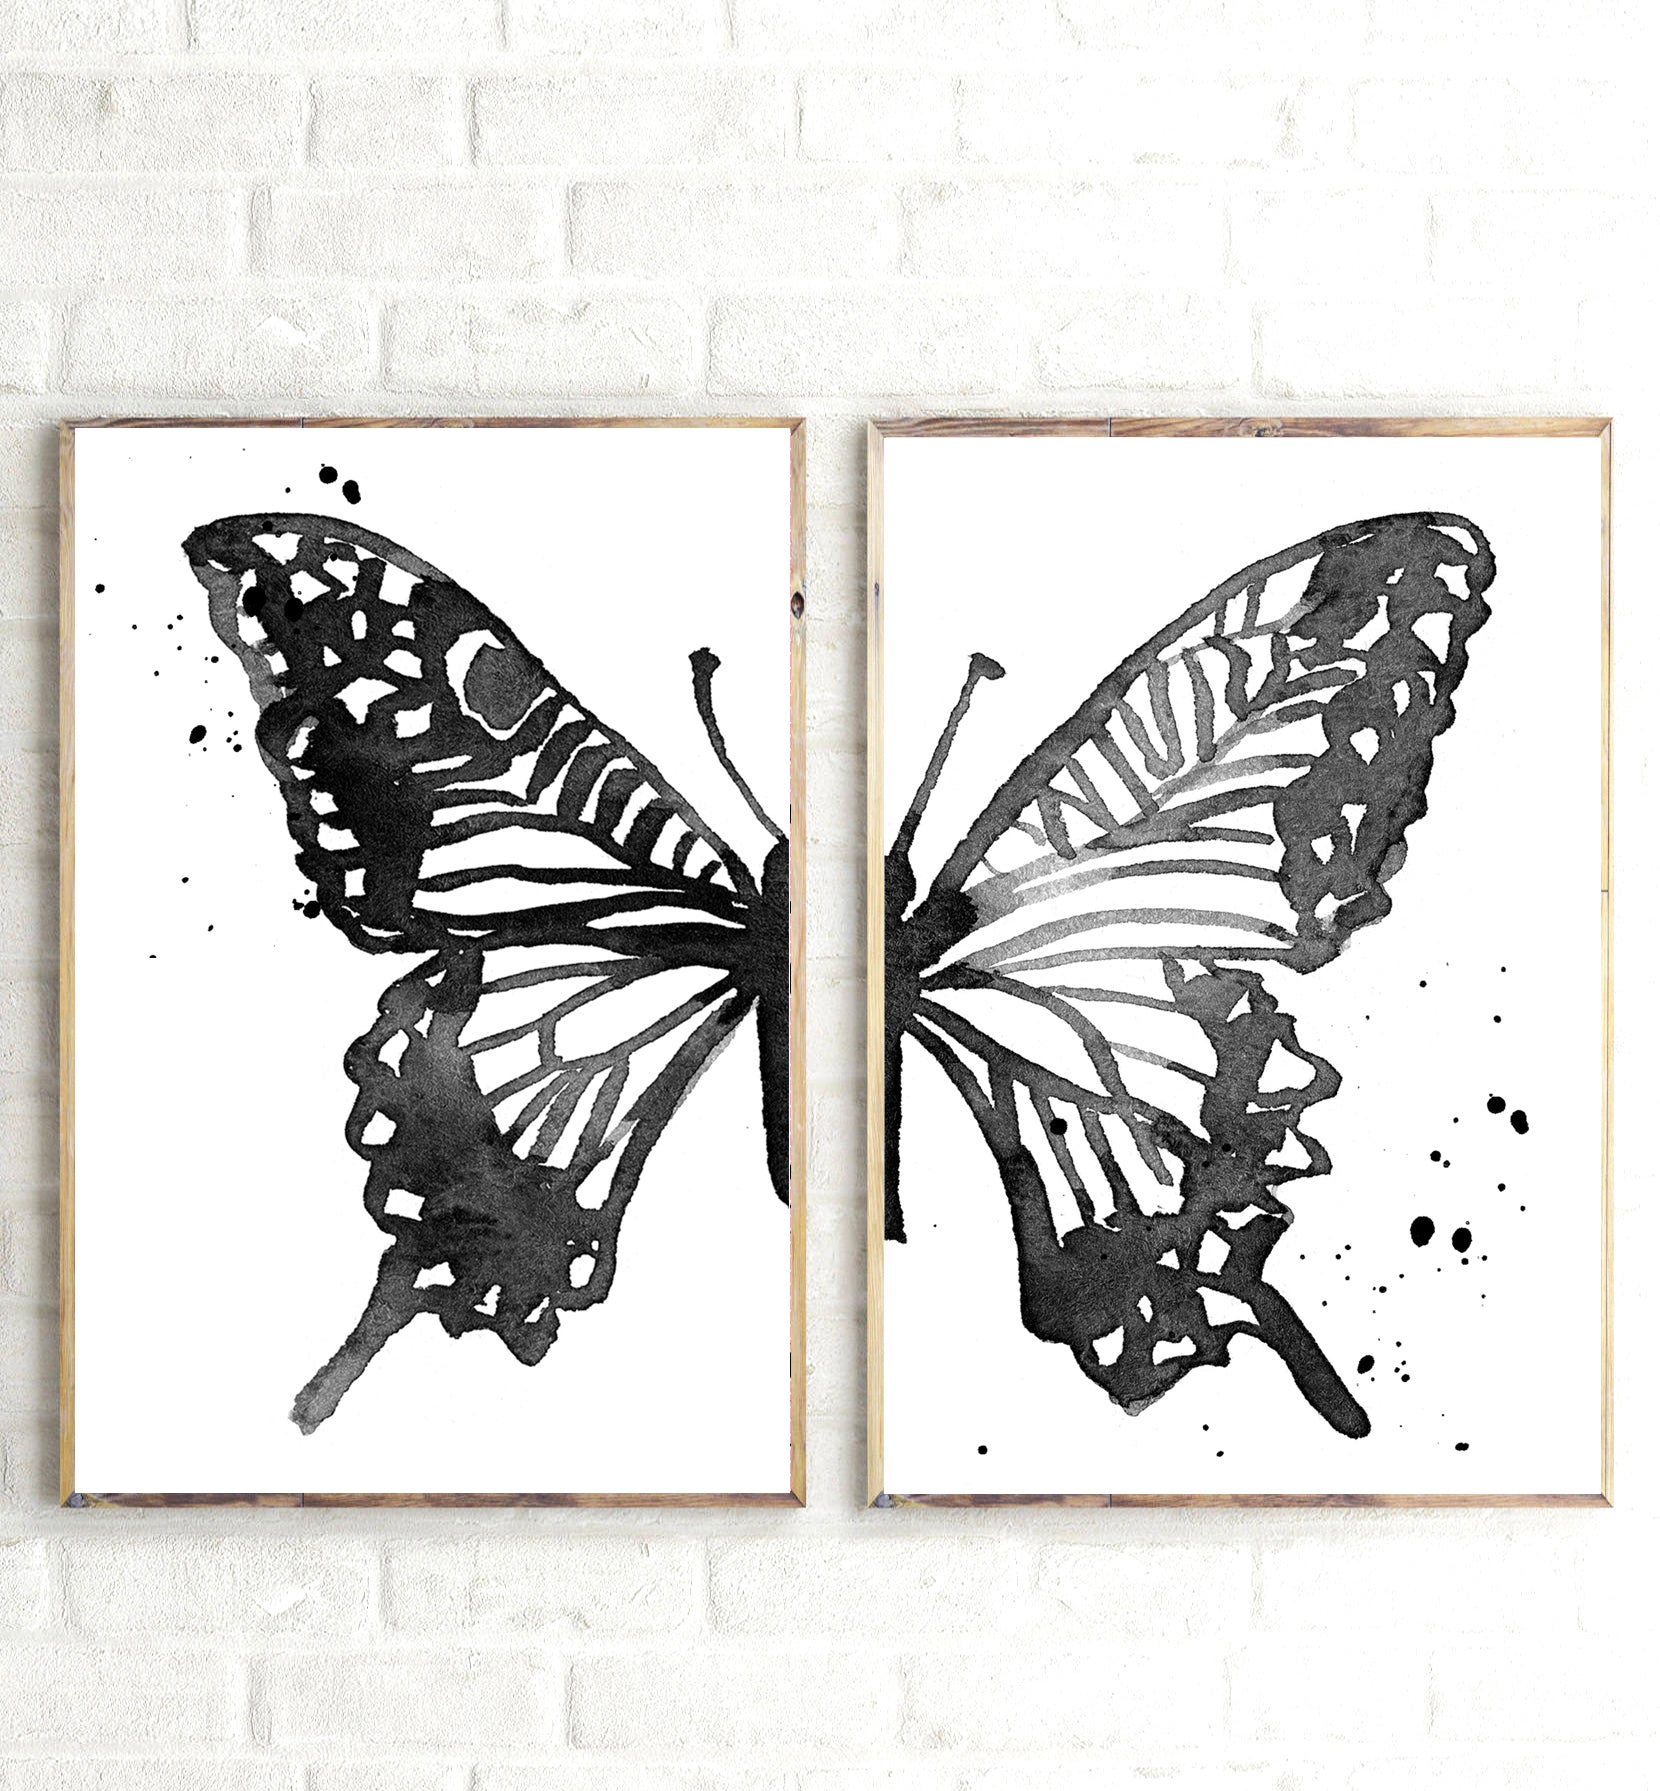 Louis Vuitton Butterfly (Horizontal) by by Jodi - Graphic Art Mercer41 Size: 36 H x 60 W x 1.5 D, Format: Wrapped Canvas